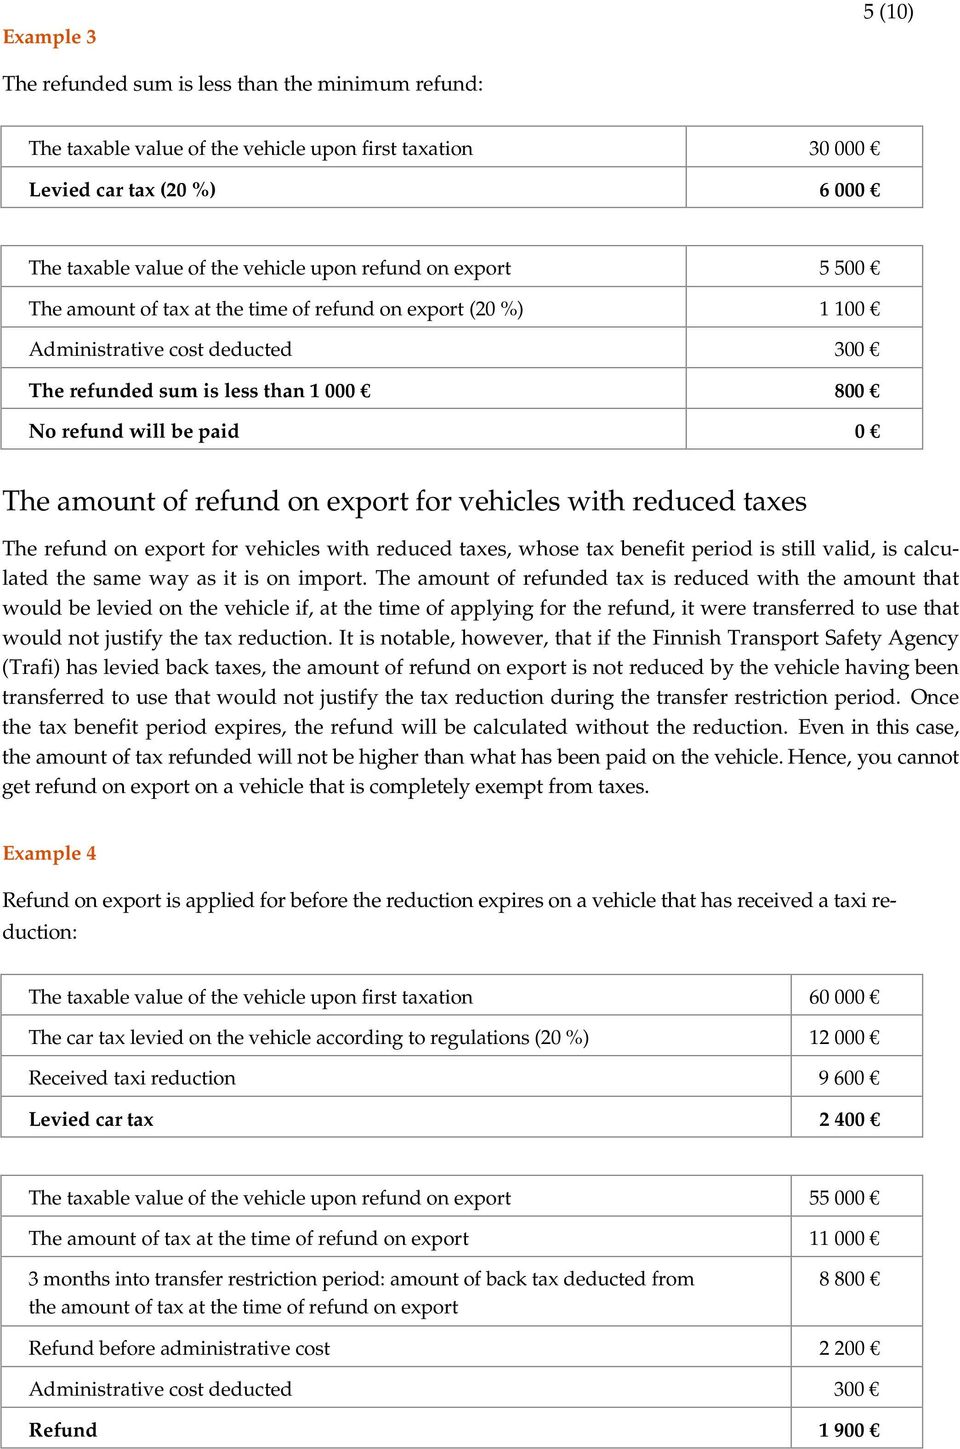 reduced taxes The refund on export for vehicles with reduced taxes, whose tax benefit period is still valid, is calculated the same way as it is on import.